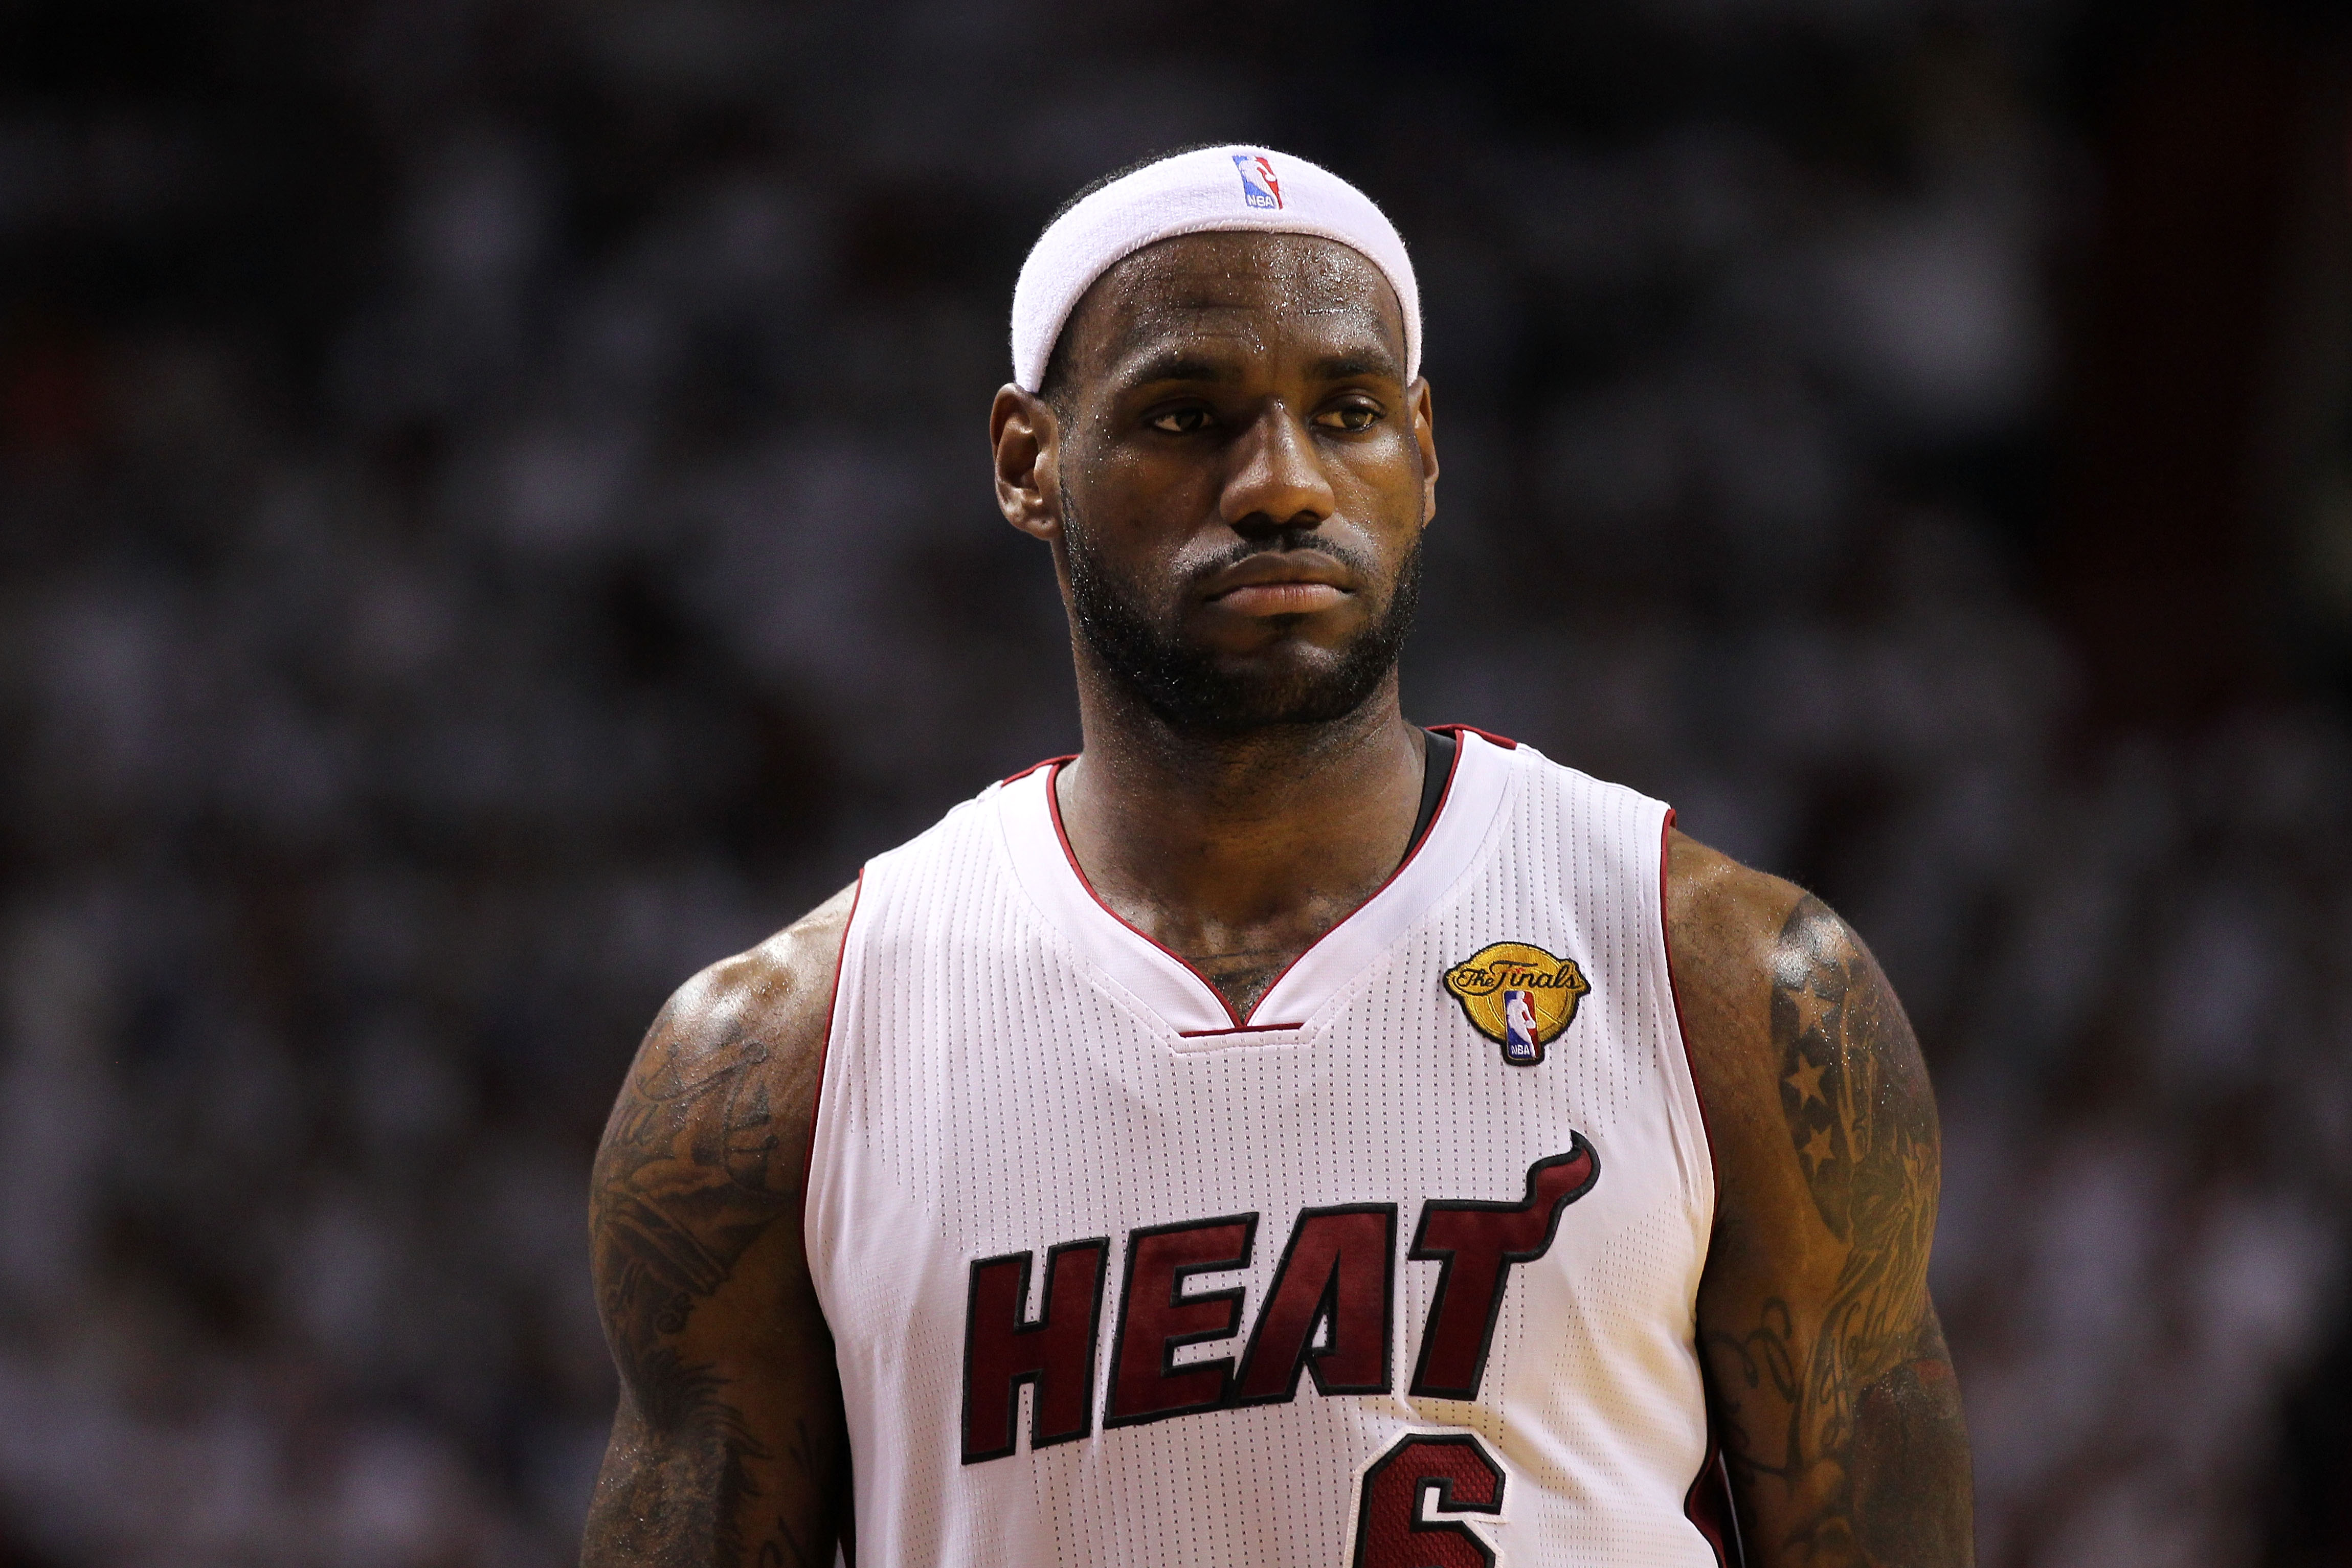 What's more unusual: Nicknames on jerseys or LeBron James fouling